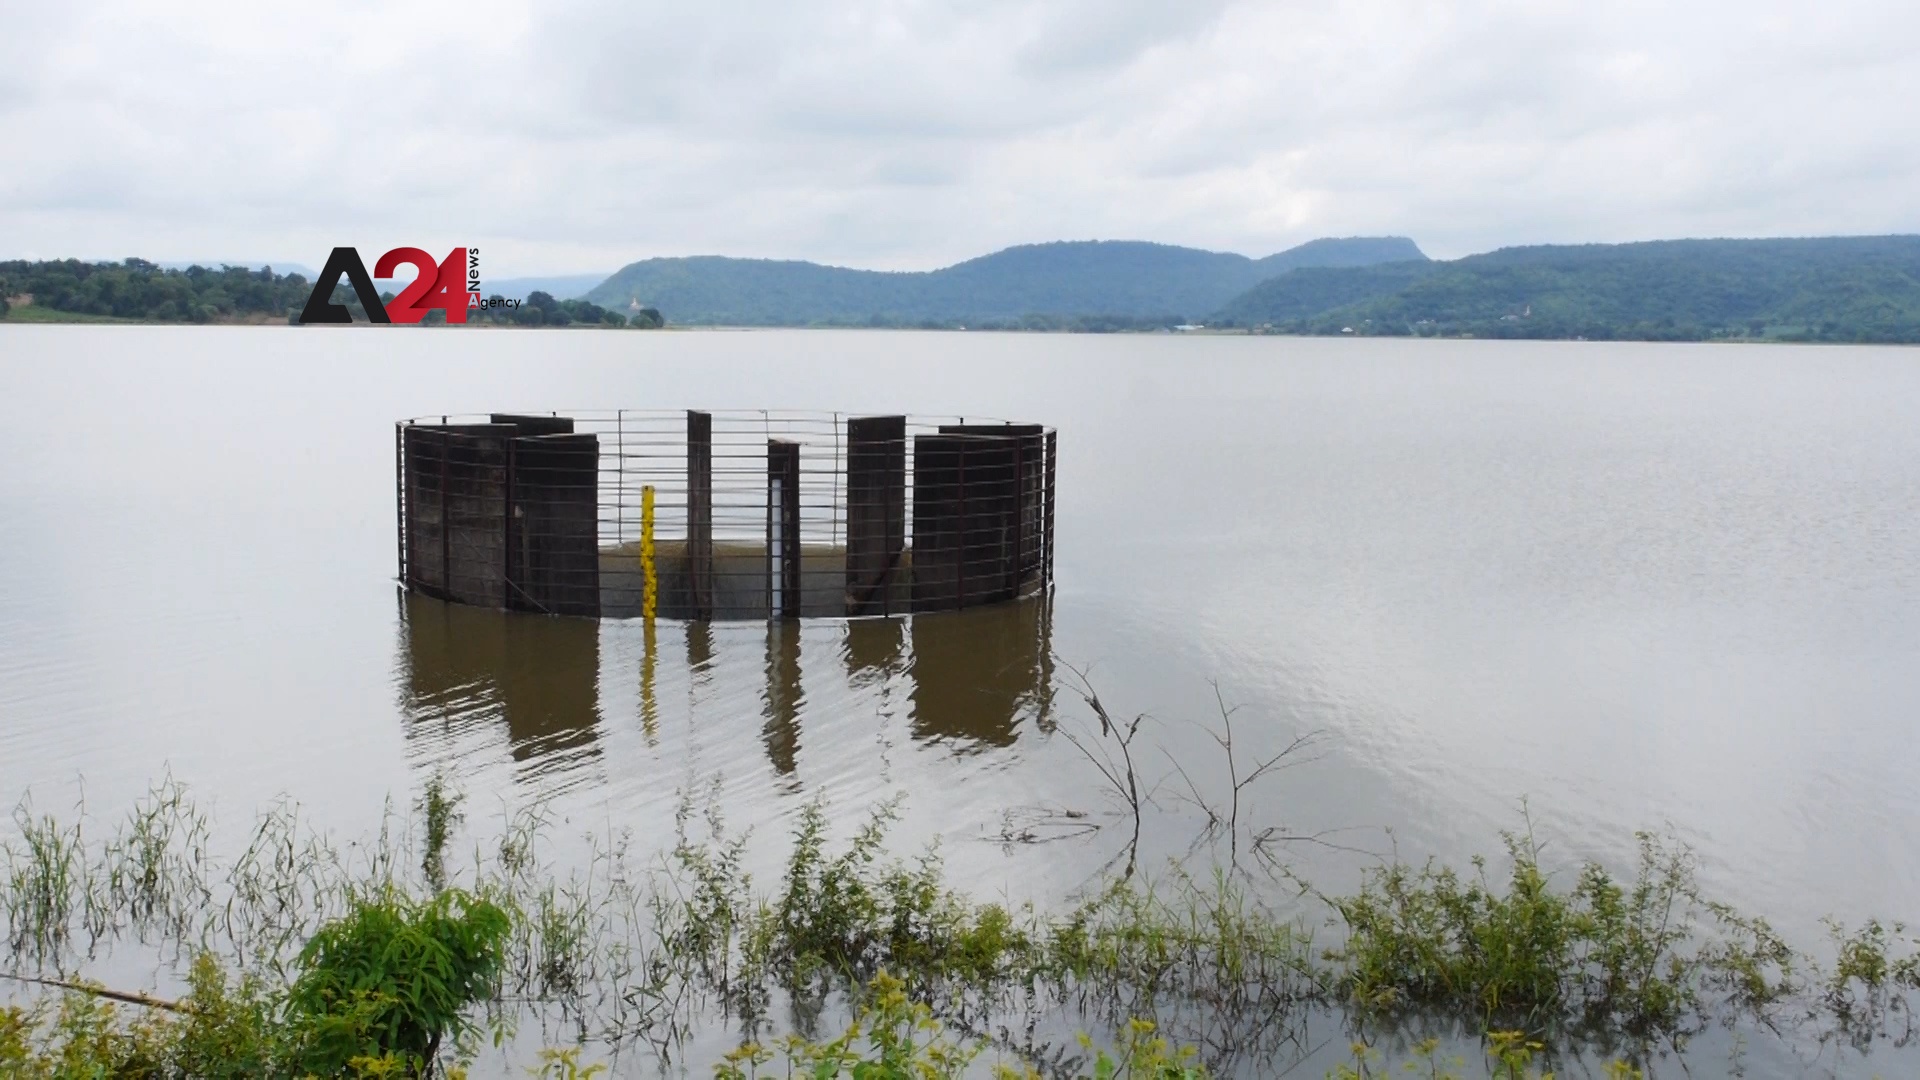 Thailand – Nakhon Ratchasima drowned by massive floods